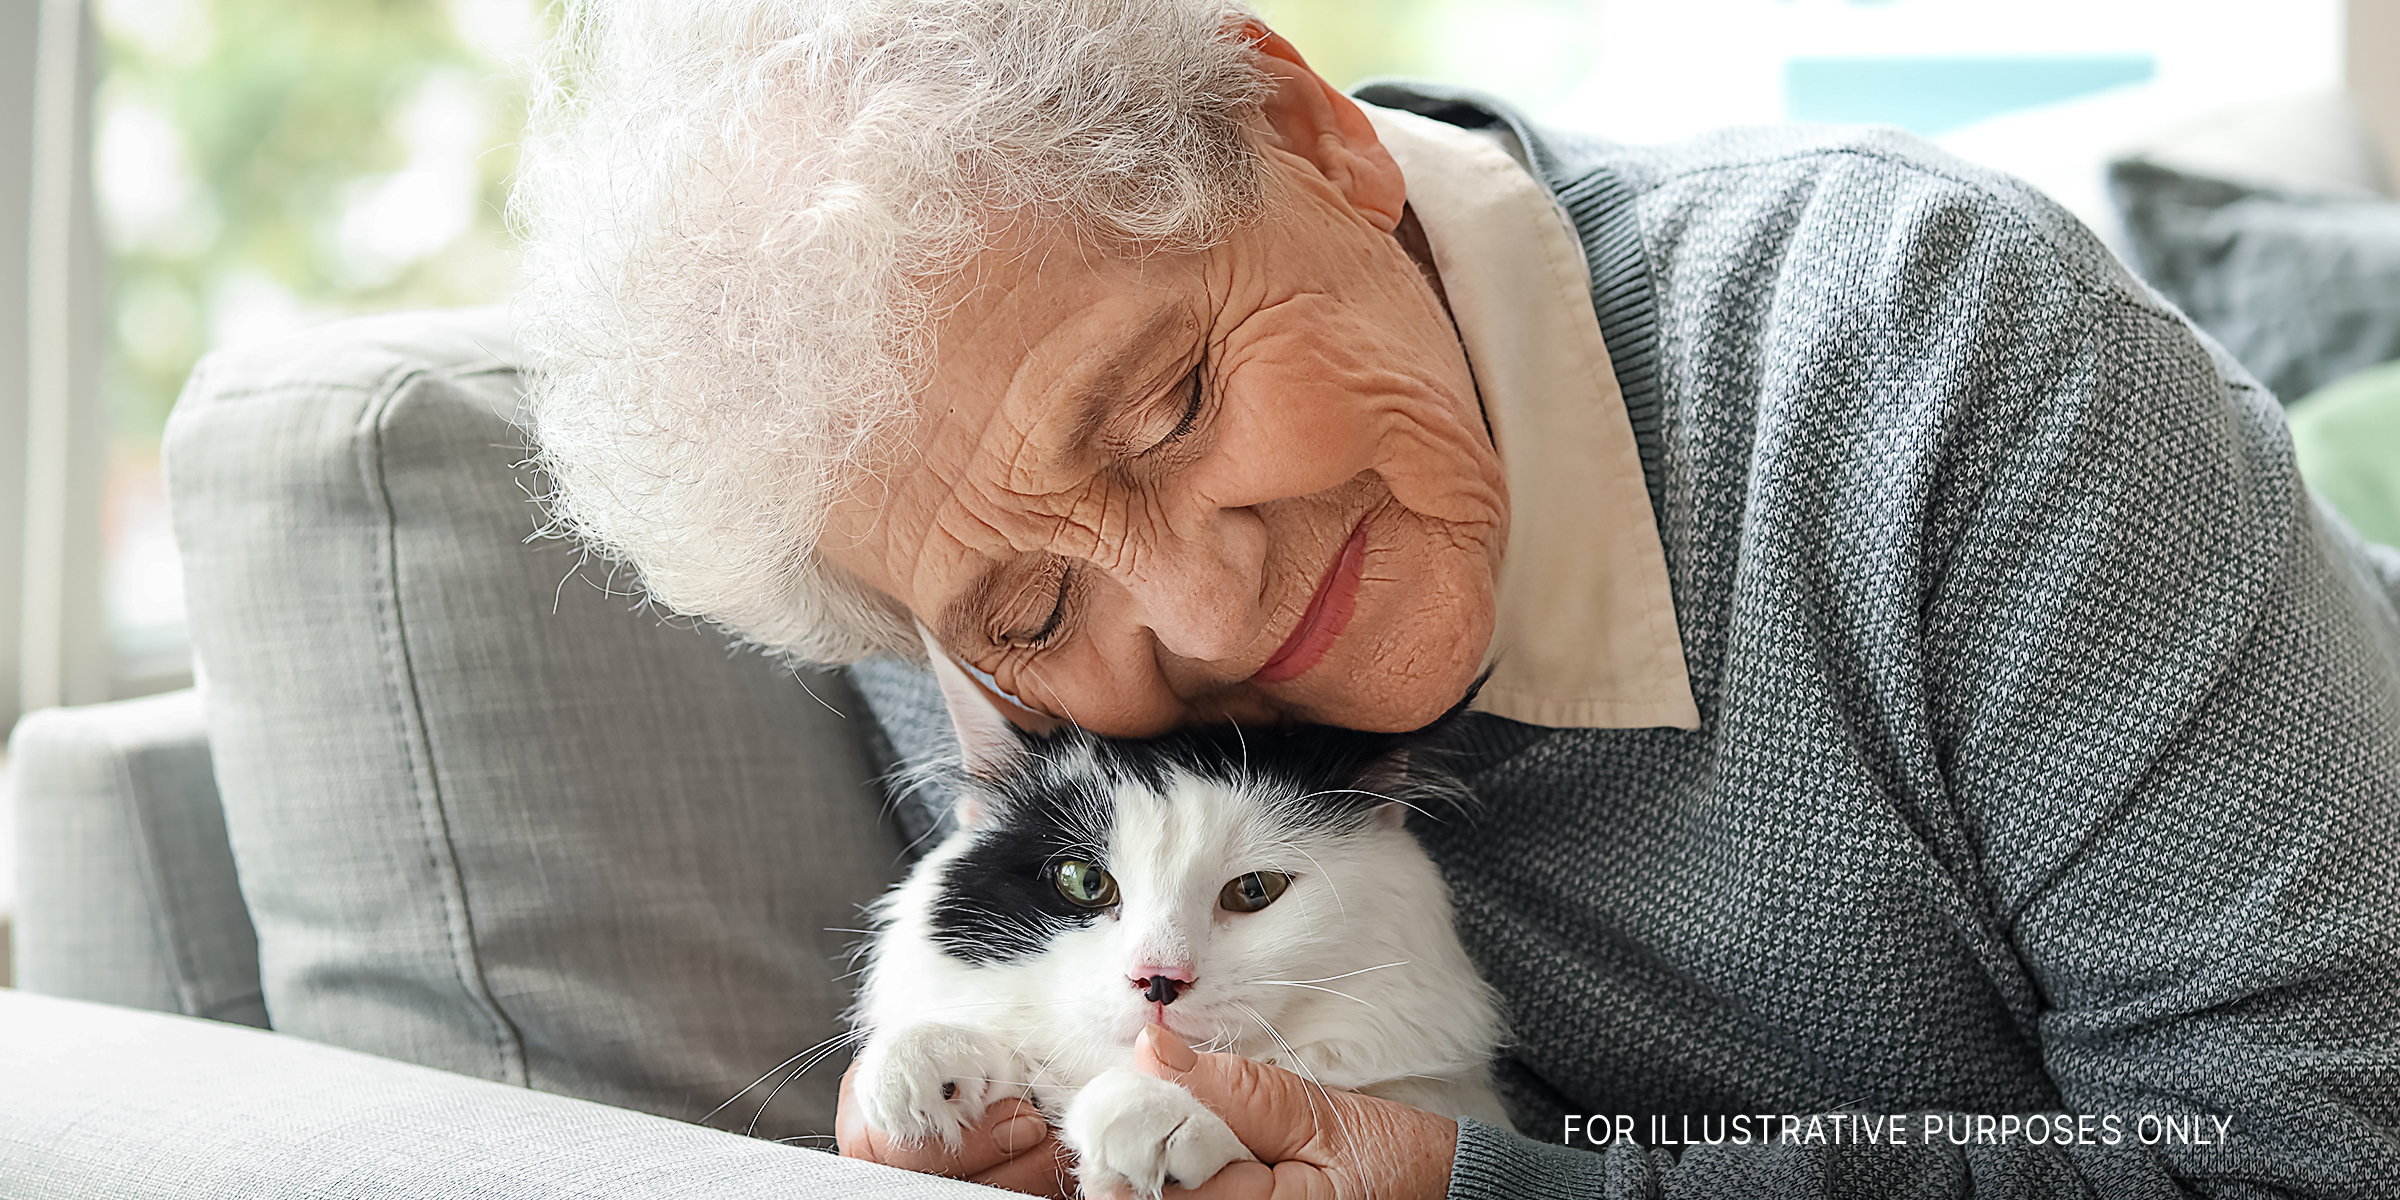 A senior woman with her adorable cat | Source: Shutterstock